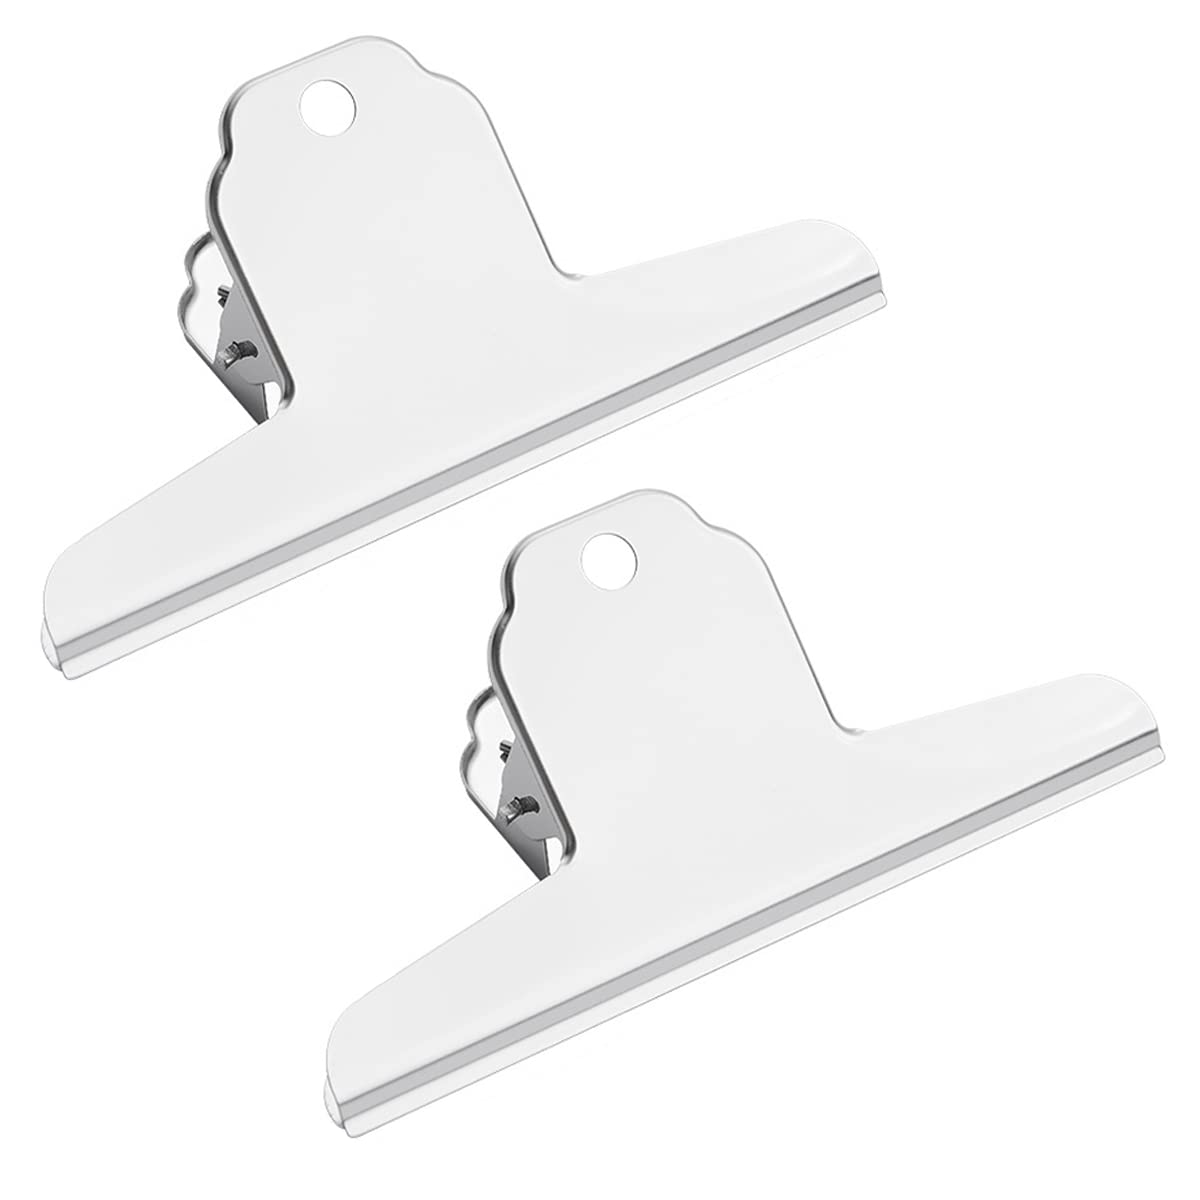 42 X 2PCS LARGE BULL CLIP STAINLESS STEEL BINDER PAPER CLAMPS METAL HINGE CLIPS FOR HOME KITCHEN OFFICE SCHOOL - TOTAL RRP £210: LOCATION - RACK A